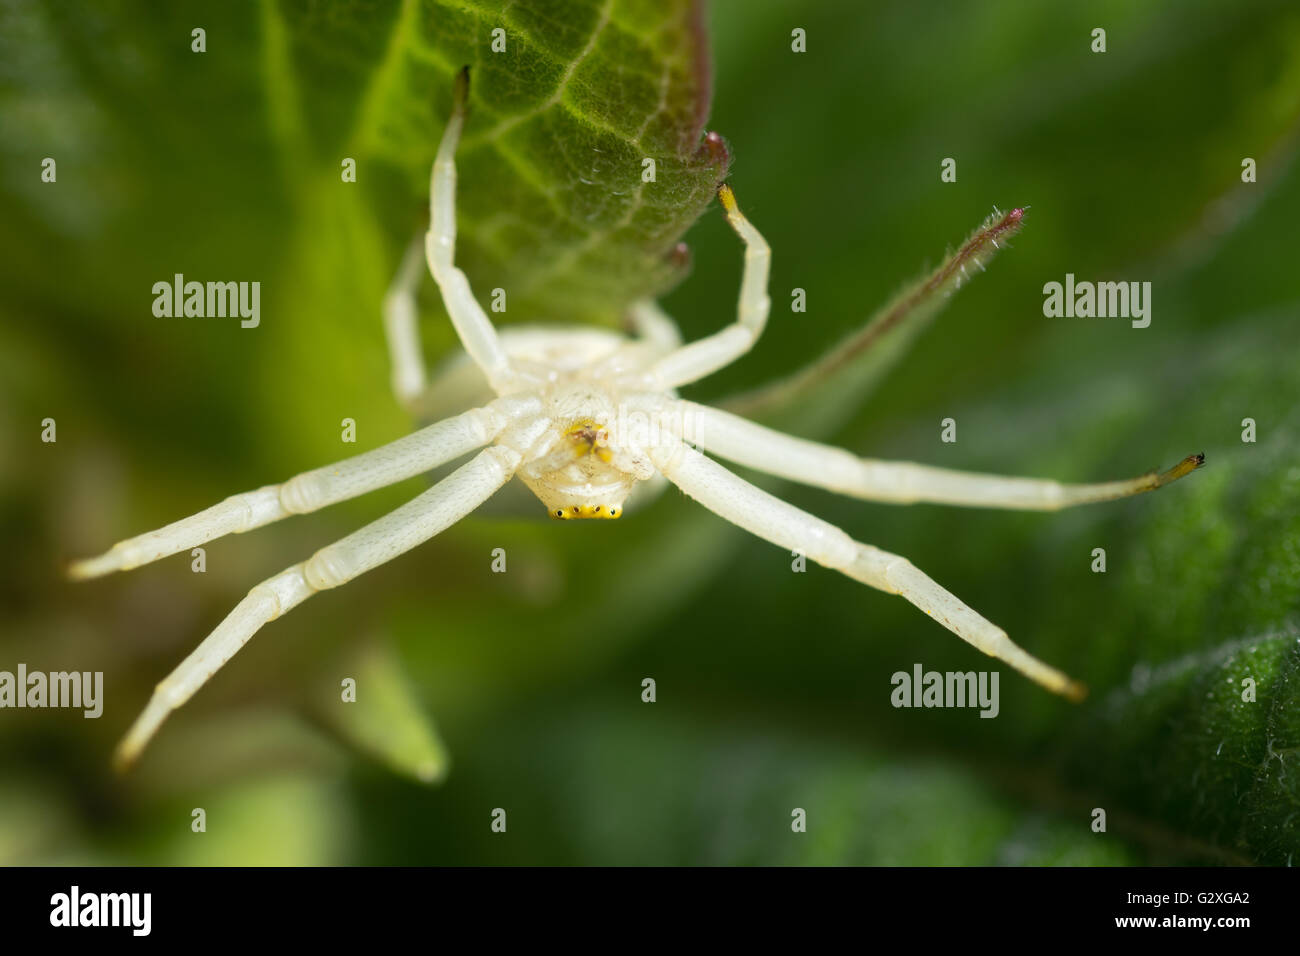 Misumena vatia crab spider upside down on leaf. A female spider in the family Thomisidae waiting for prey Stock Photo